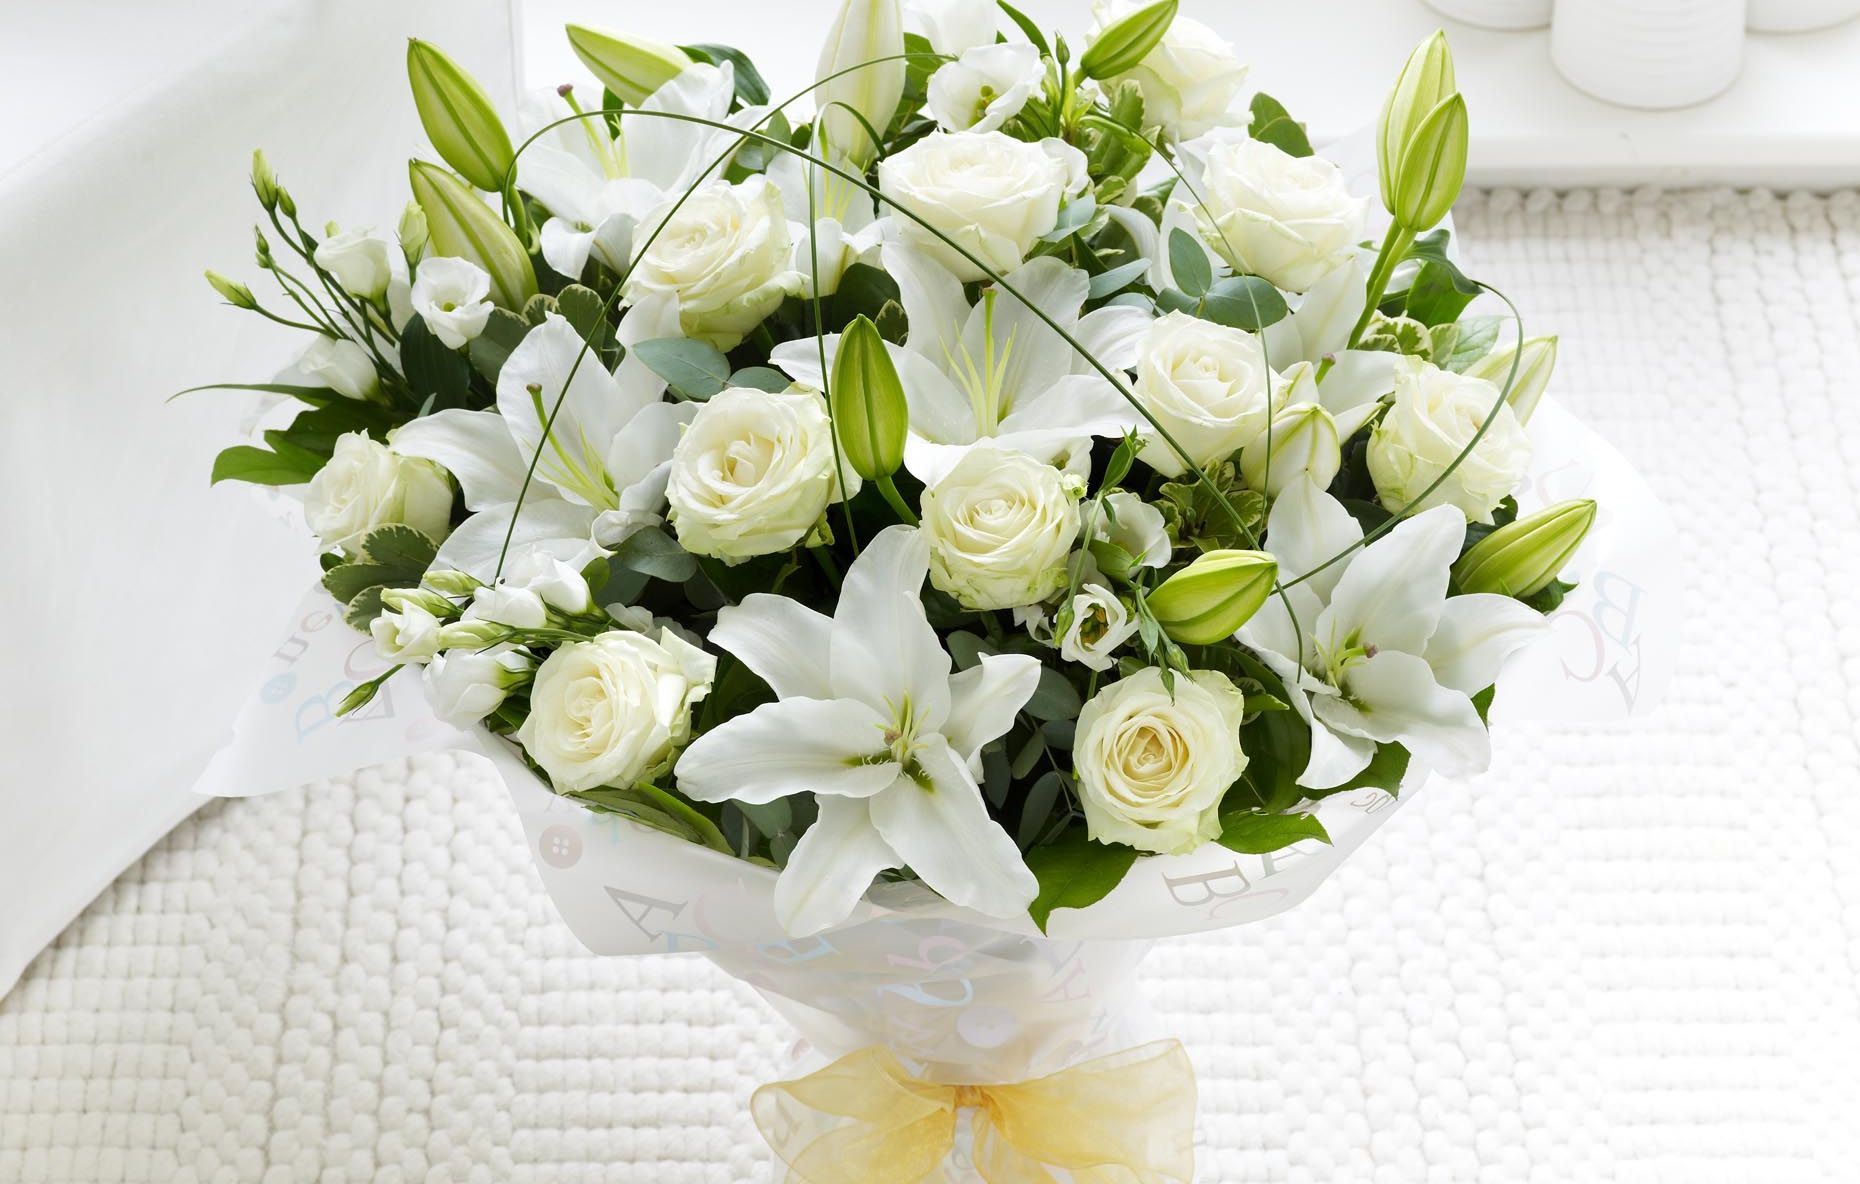 Sympathy-Flowers-for-Funeral